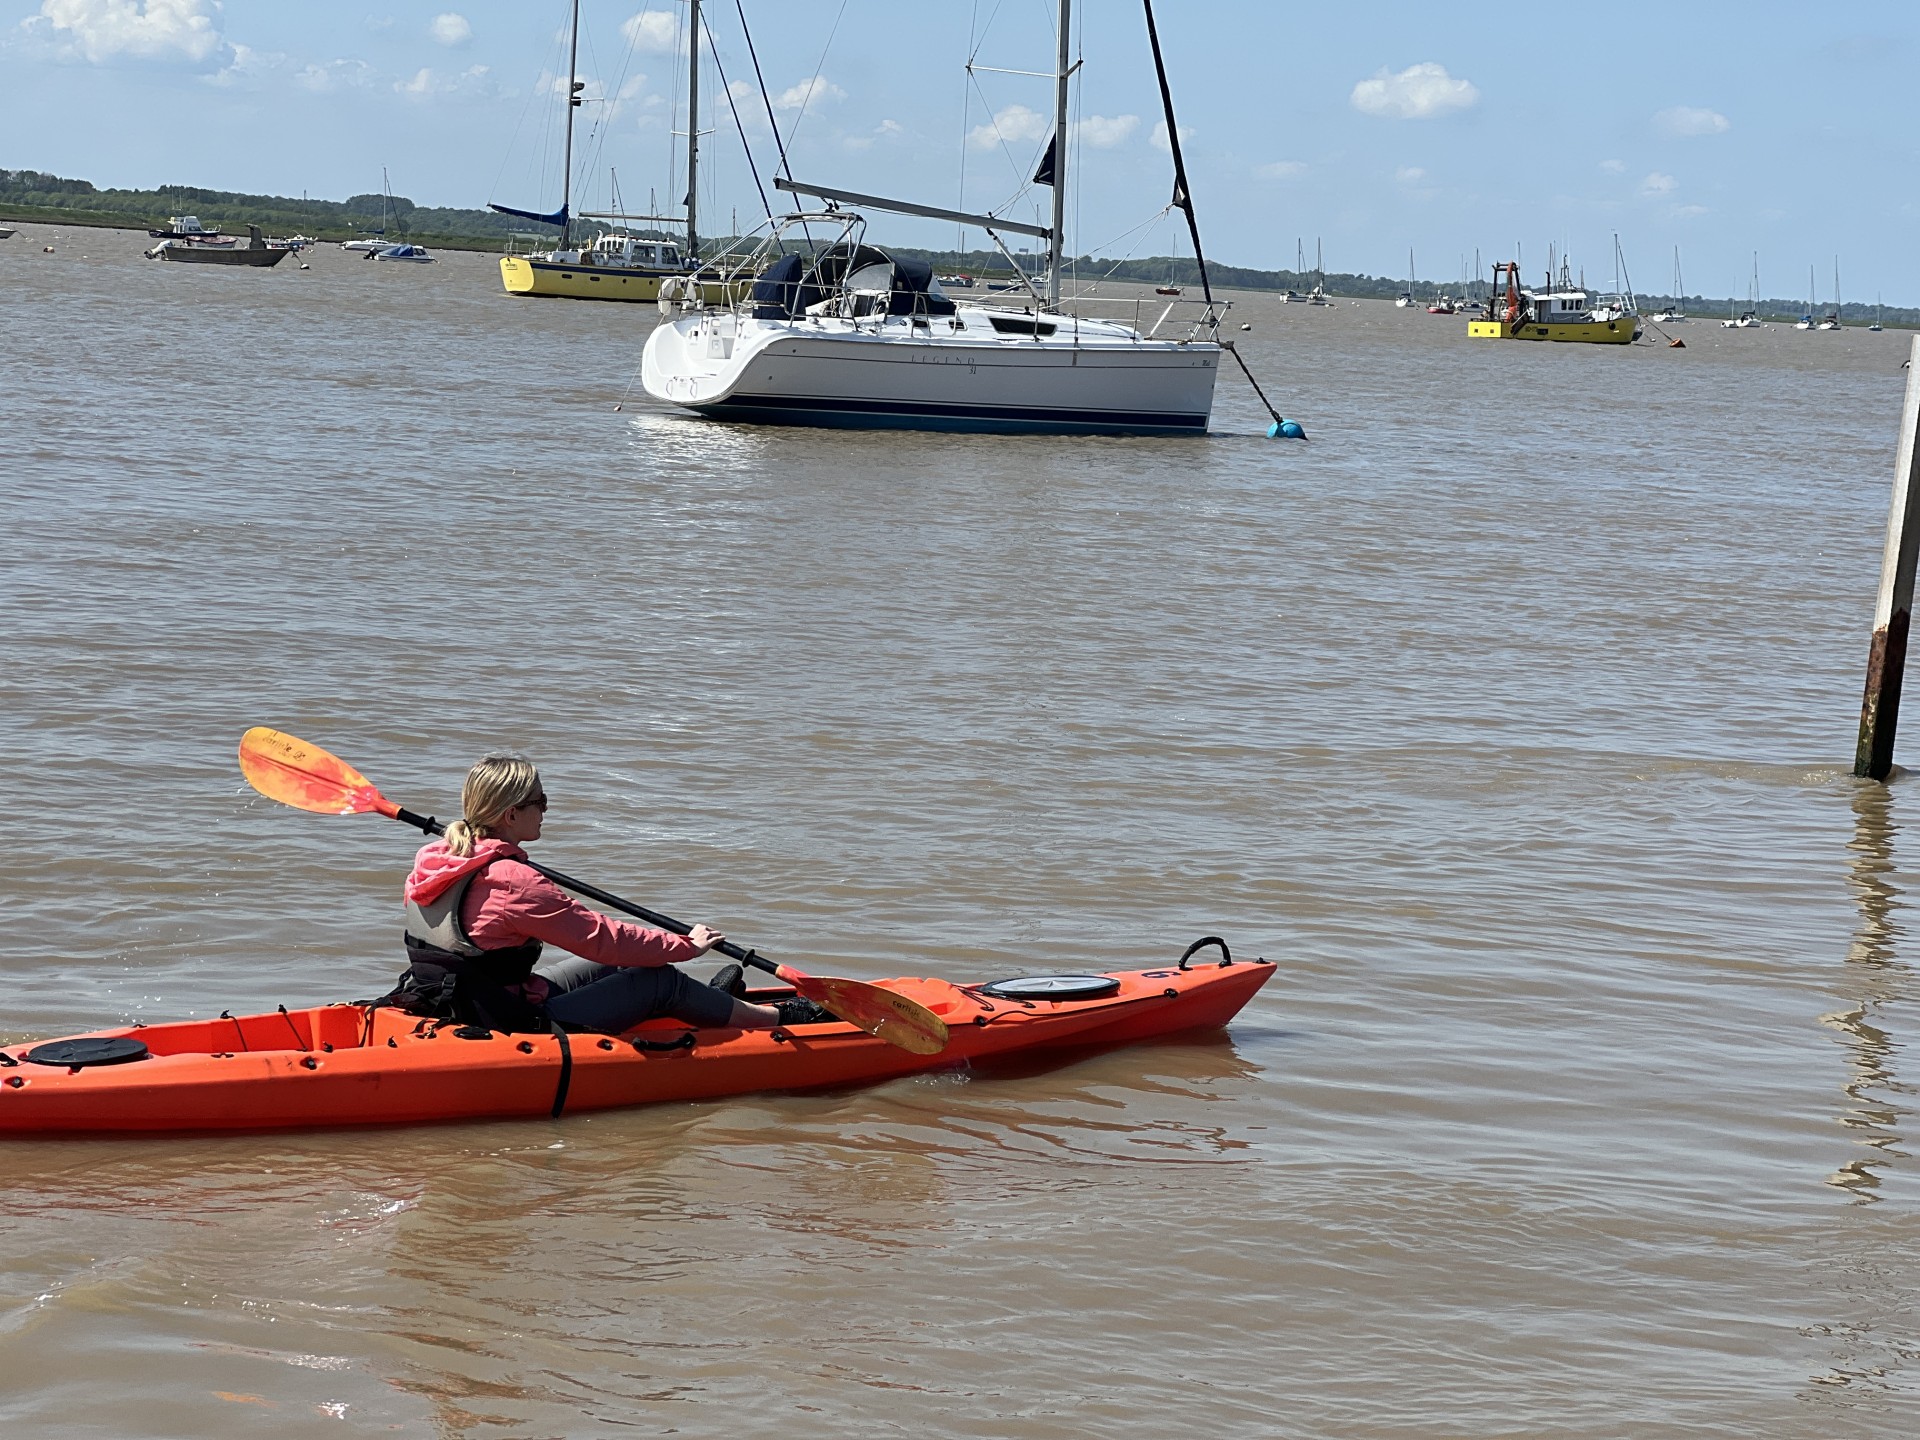 Heading out on the Deben estuary with NOMAD Sea Kayaking.